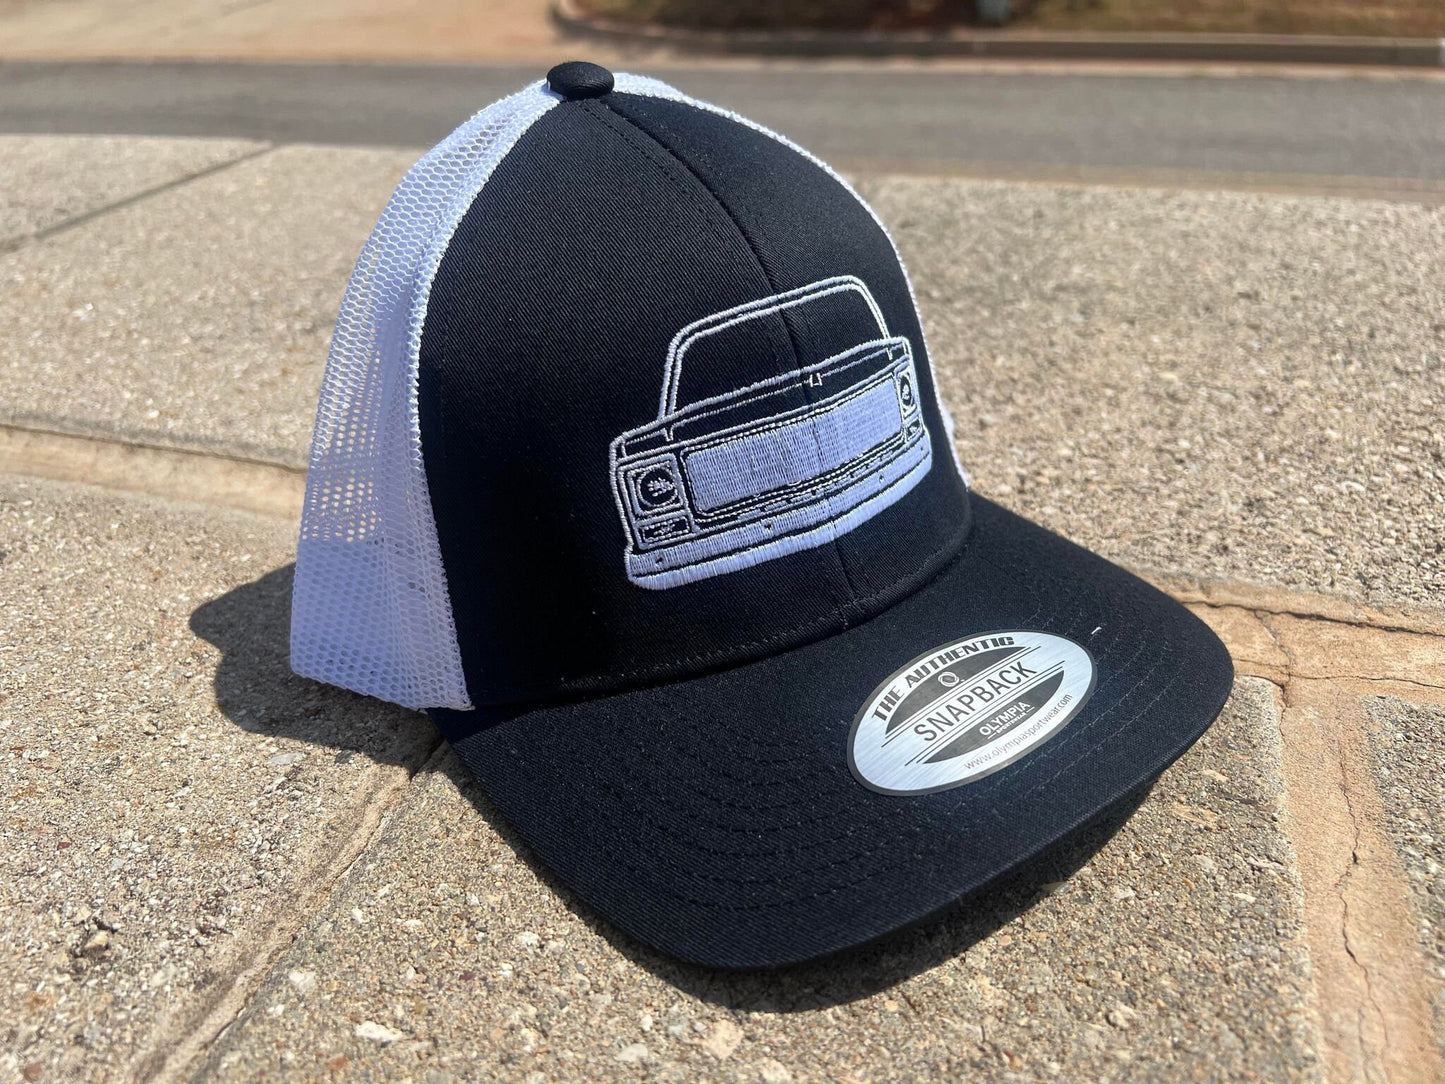 Vintage Squarebody Roundeye GMC Chevy Truck Mesh Trucker Hat by Oklahoma Customs - 7 Variations Available